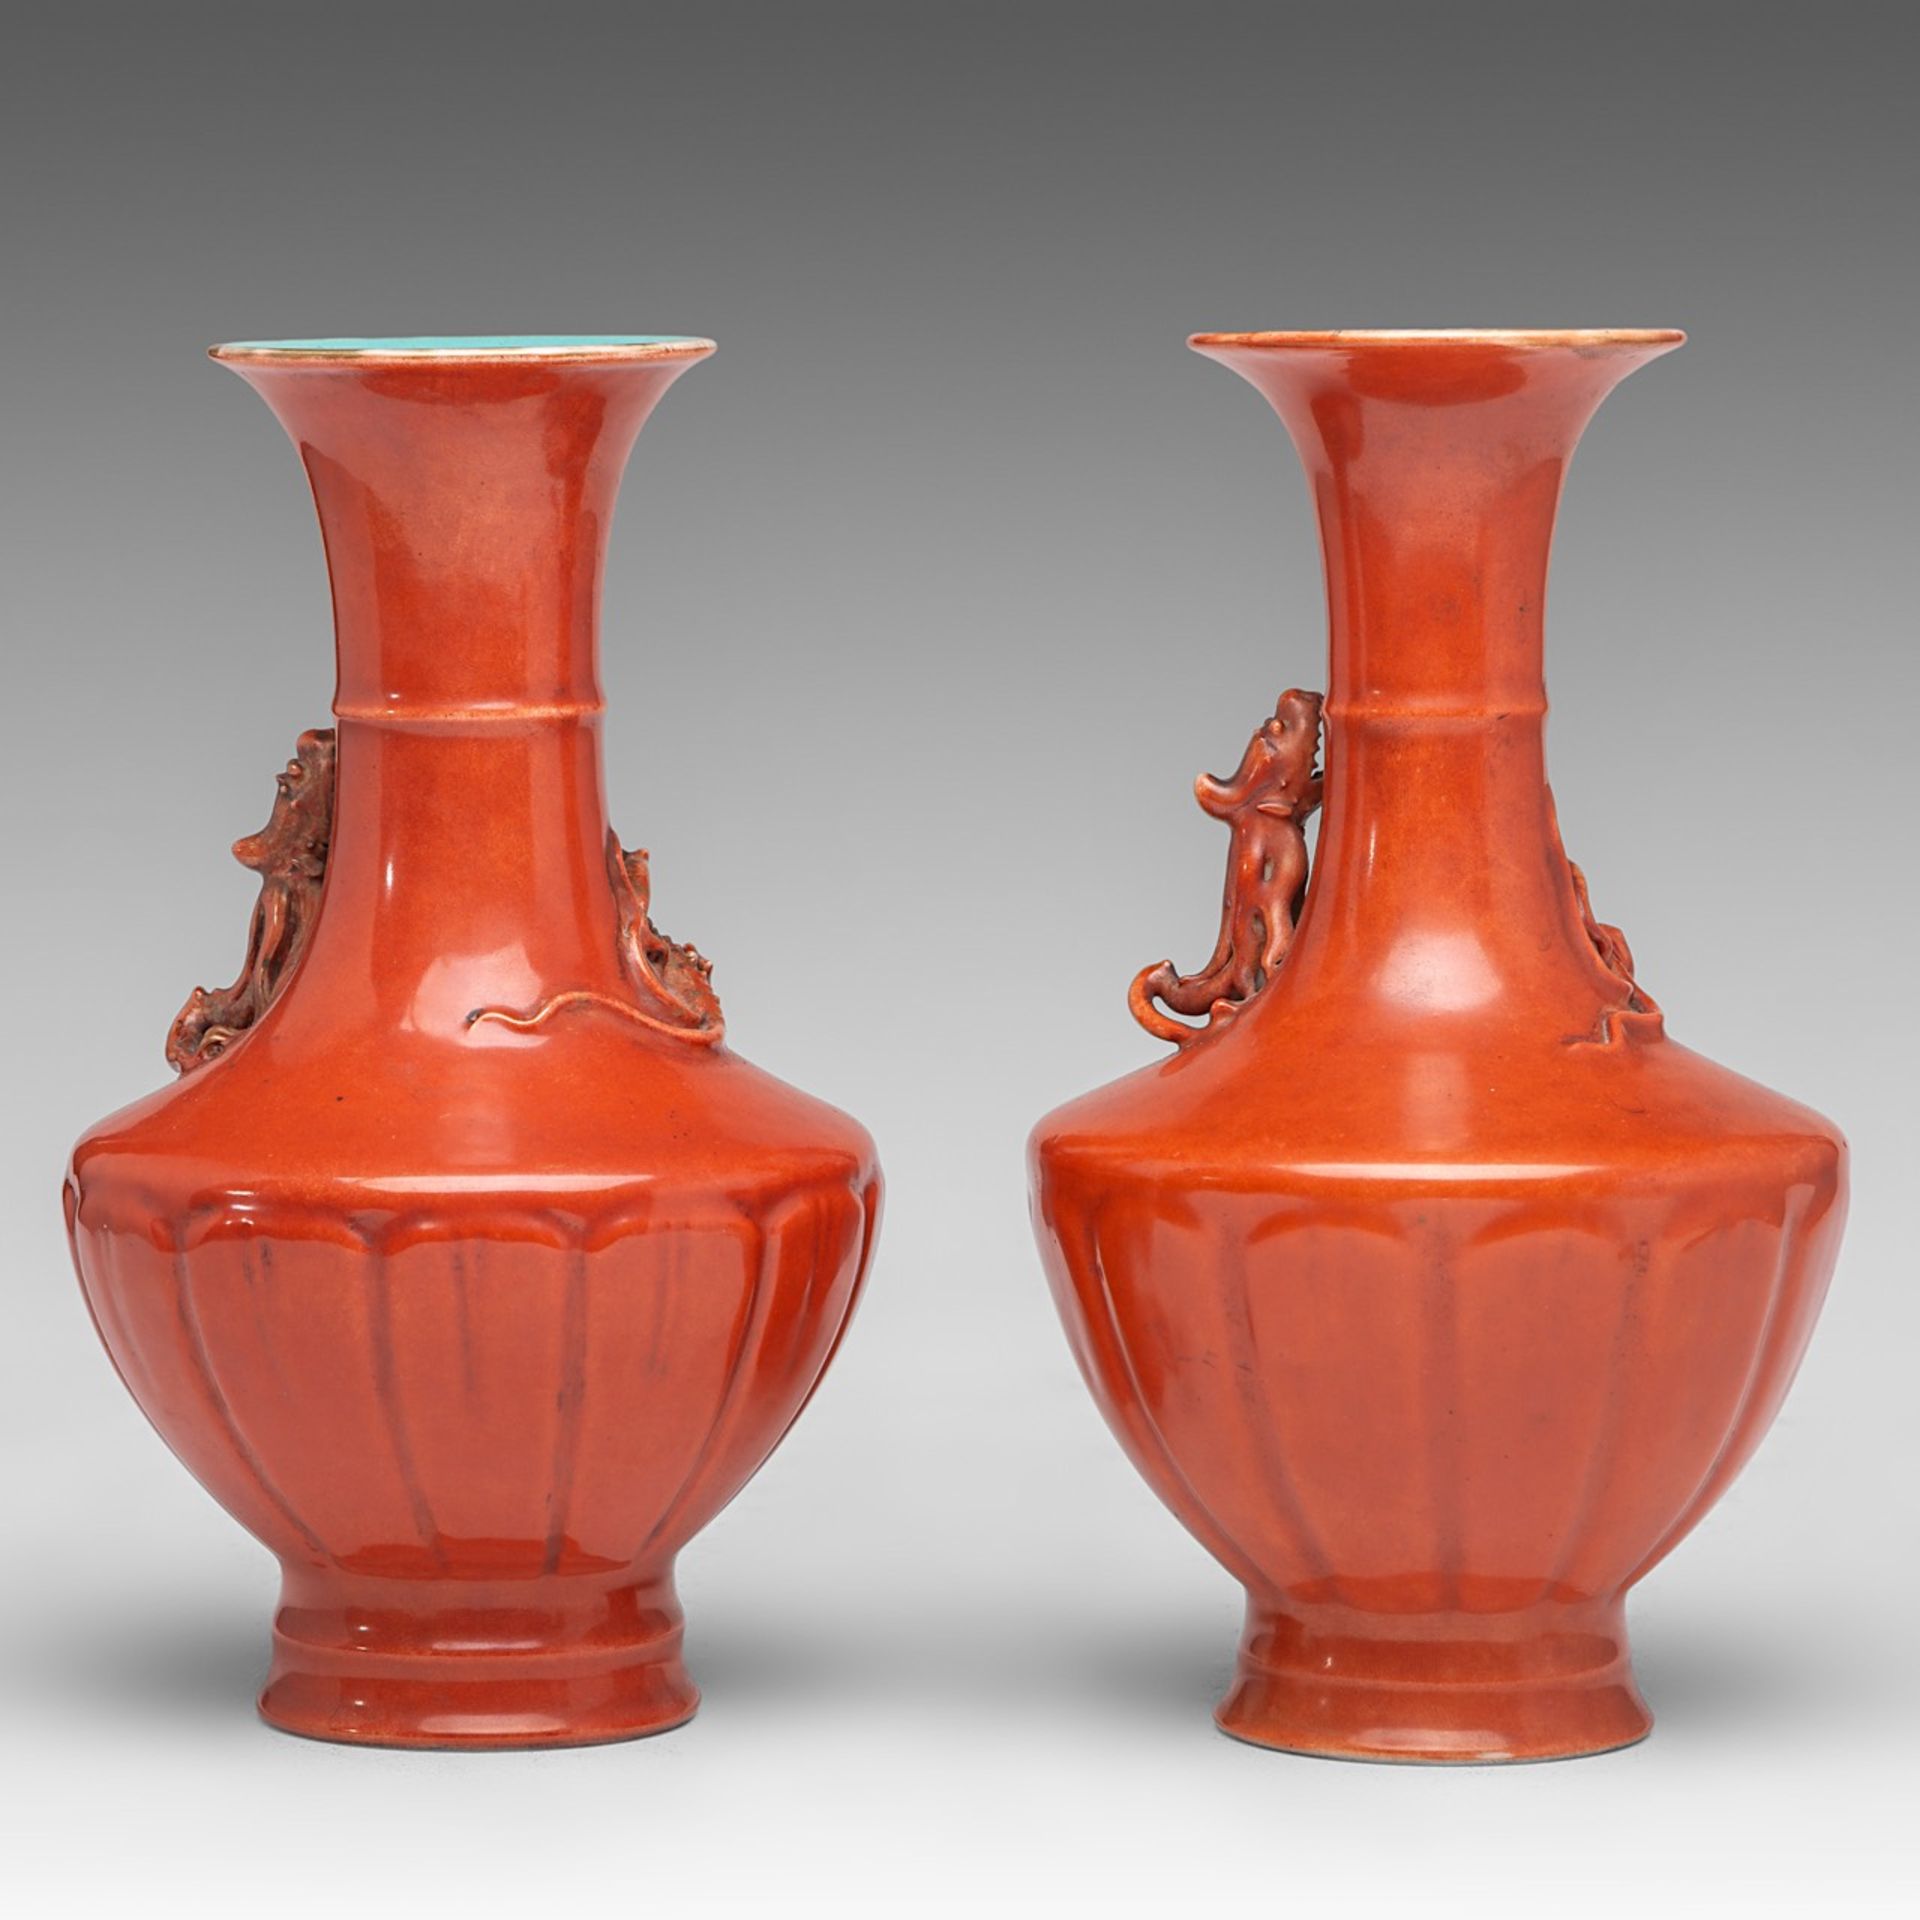 A similar pair of Chinese coral-red ground 'Dragon' vases, with a Qianlong mark, 19thC, H 19 - 19,5 - Bild 3 aus 6